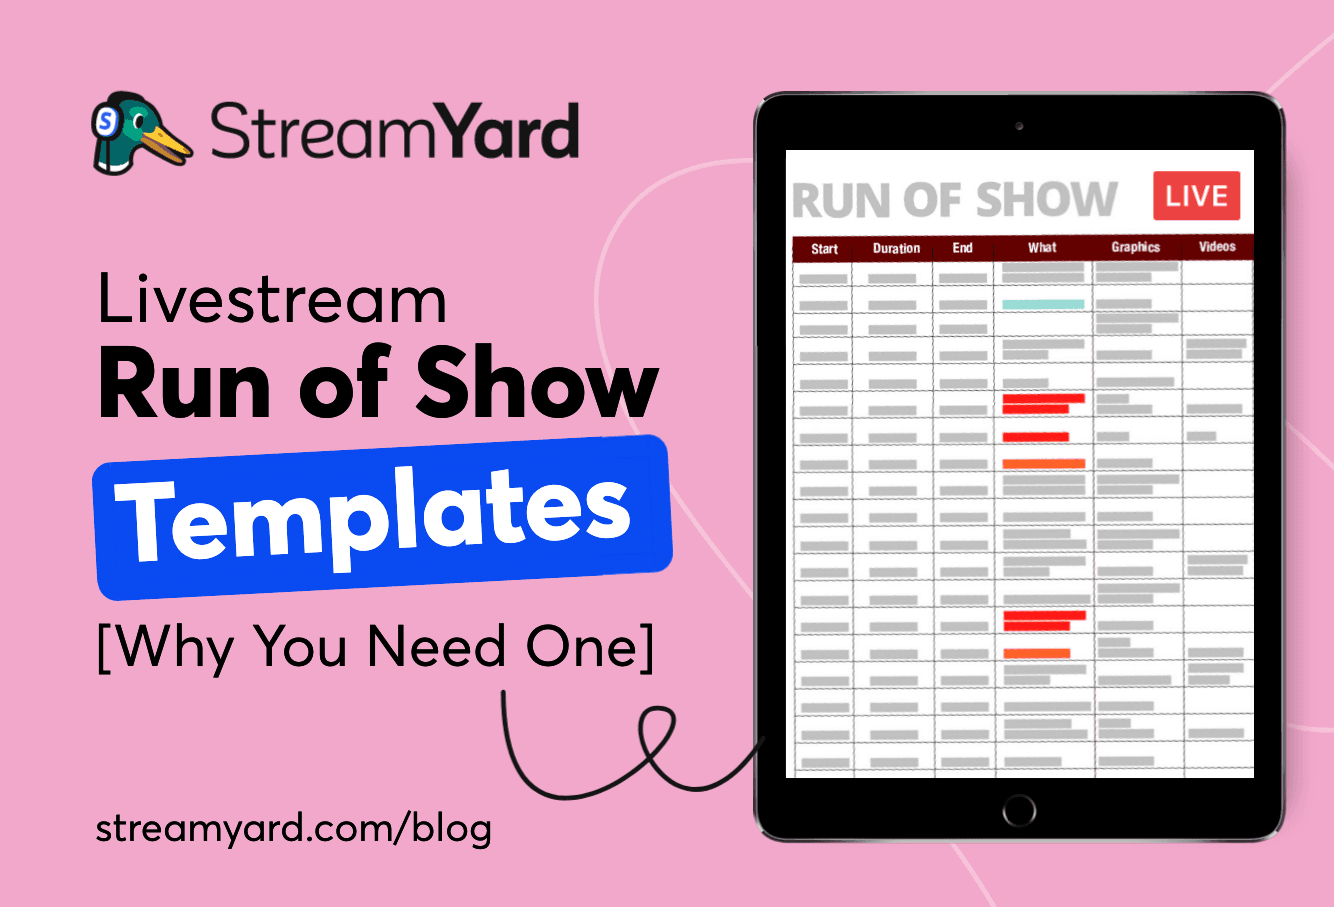 Learn how to create a run of show for your livestream production, including a free template for building an outline for your show.